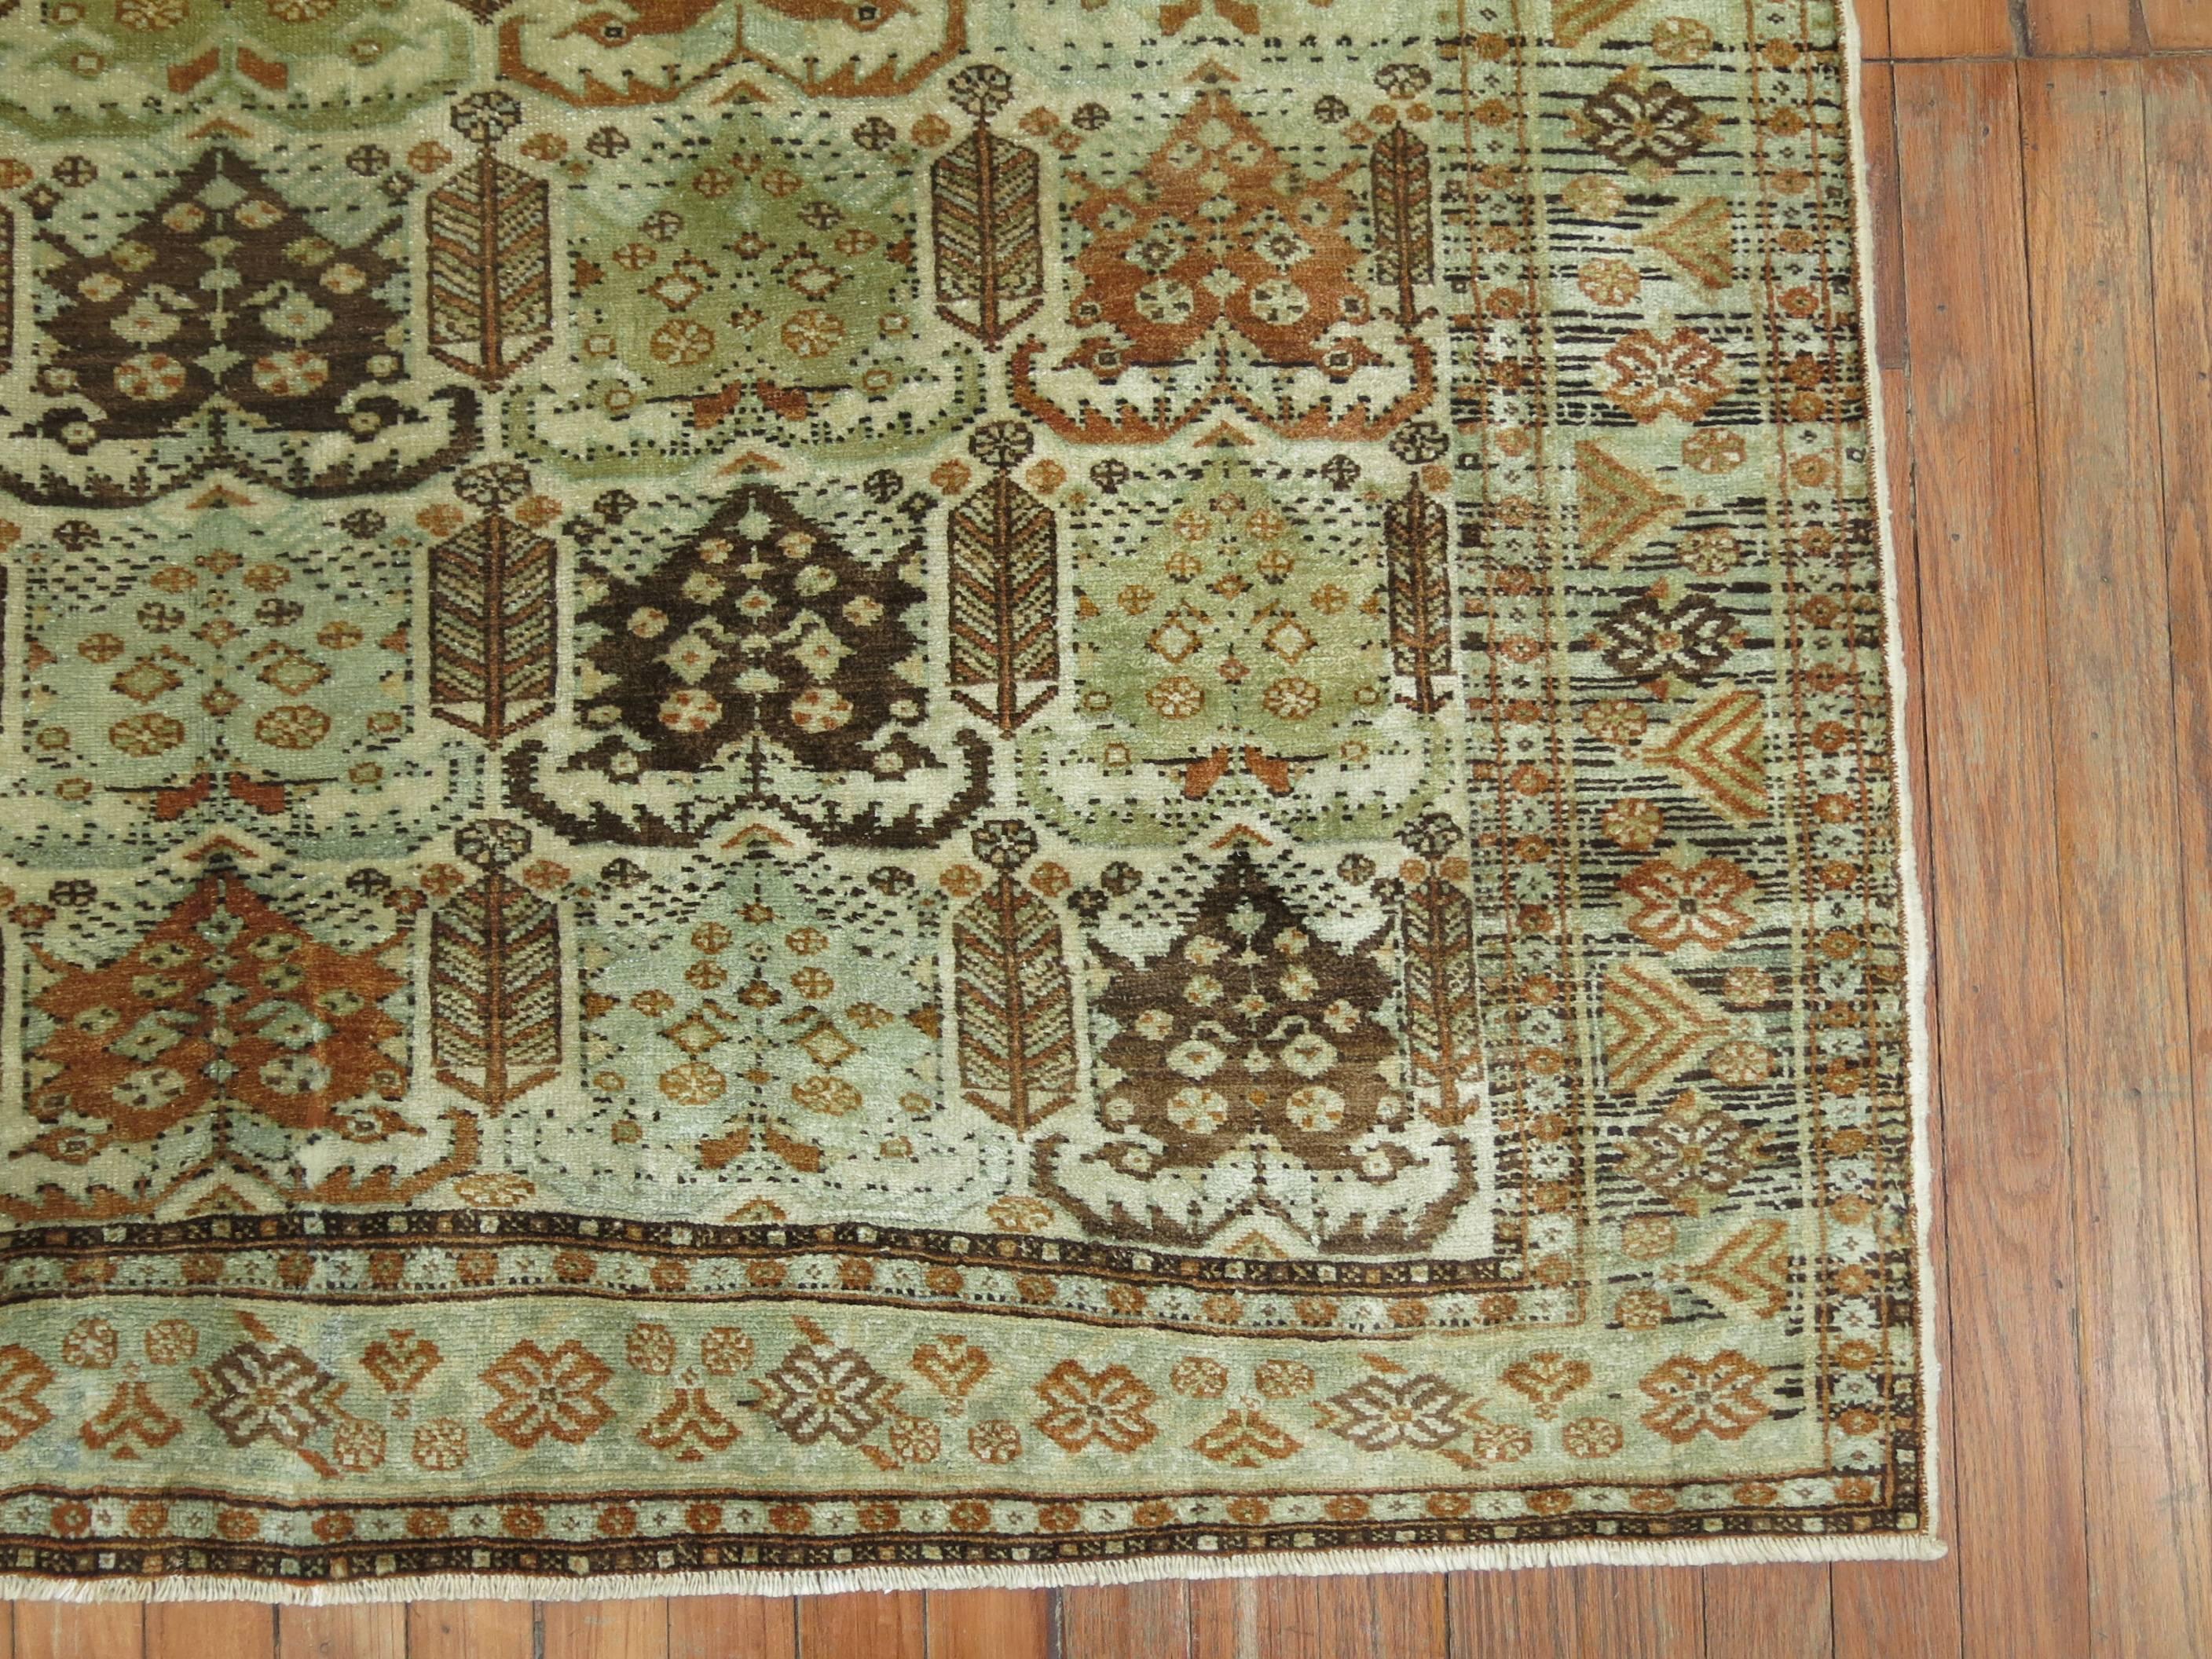 An early 20th century Persian Afshar rug.